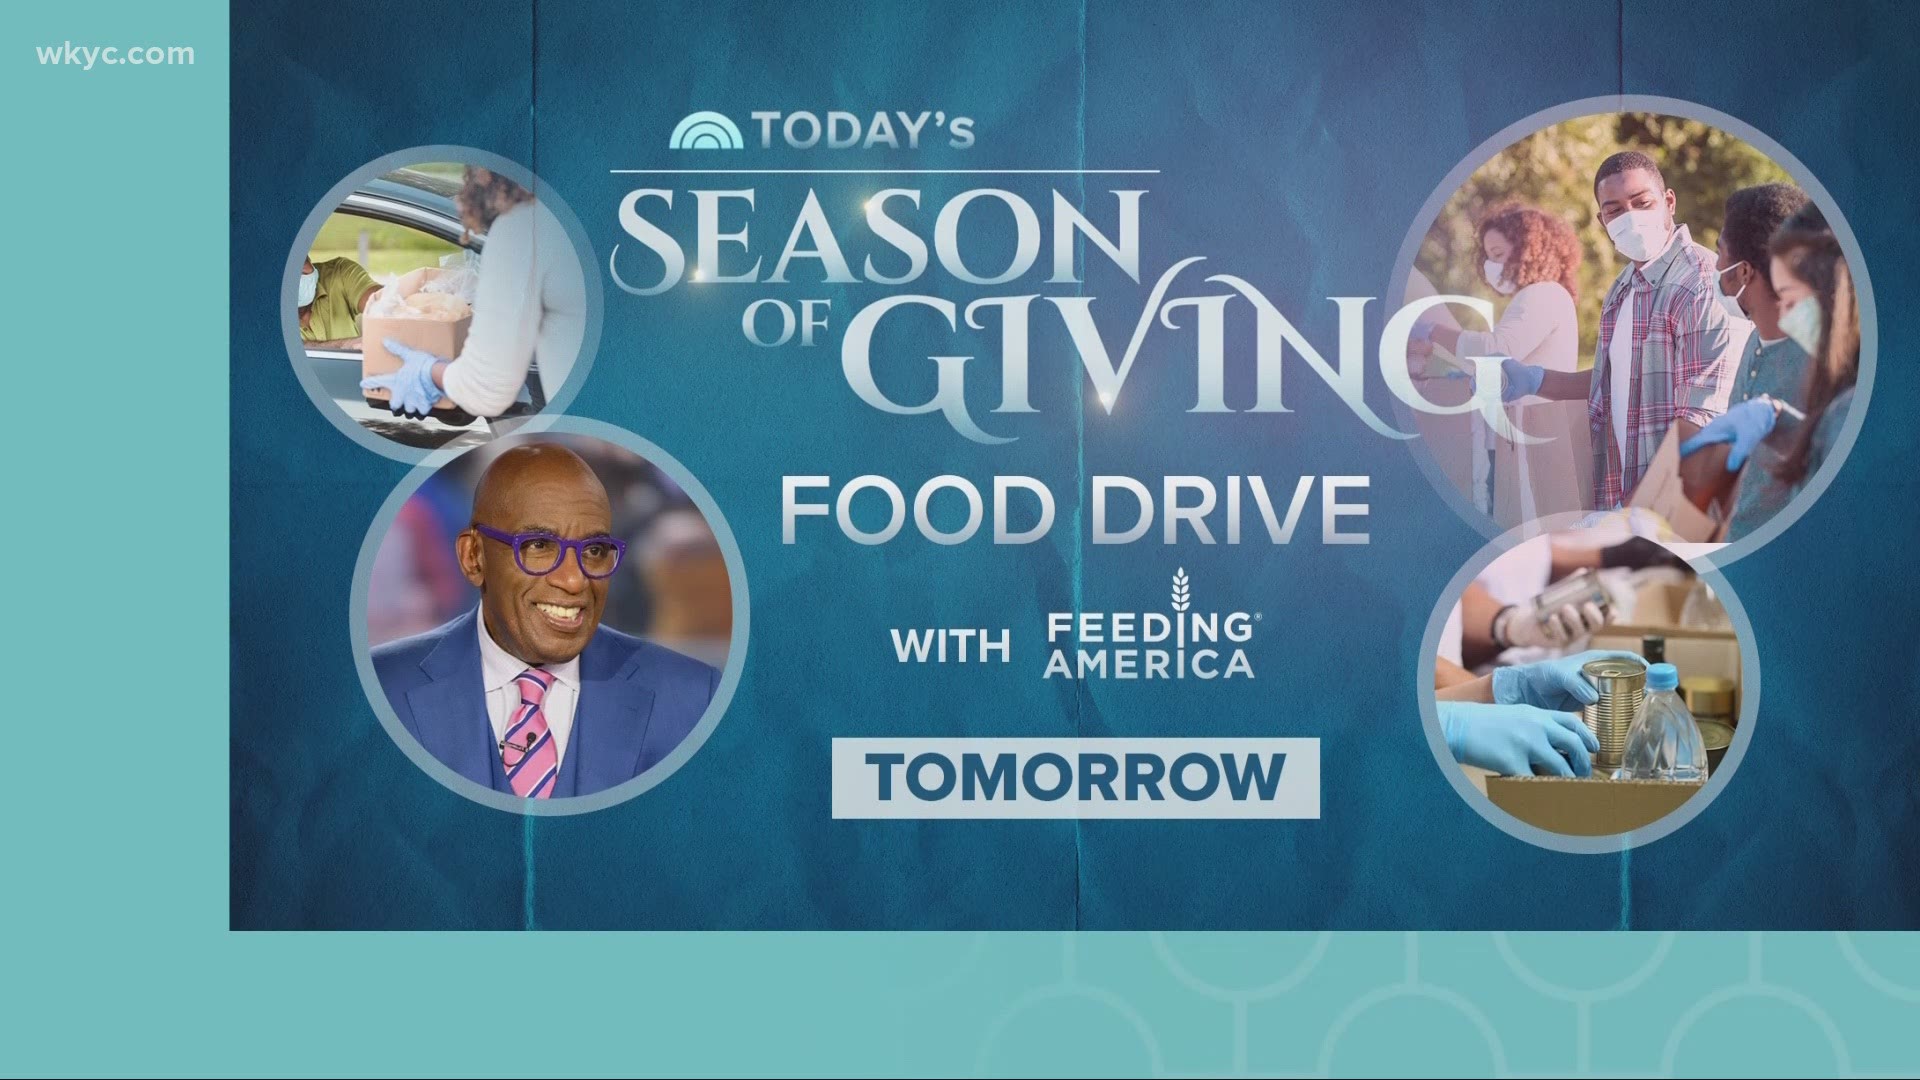 Betsy Kling talks to TODAY's Al Roker to raise awareness about food banks, which are struggling to meet rising demand for emergency food